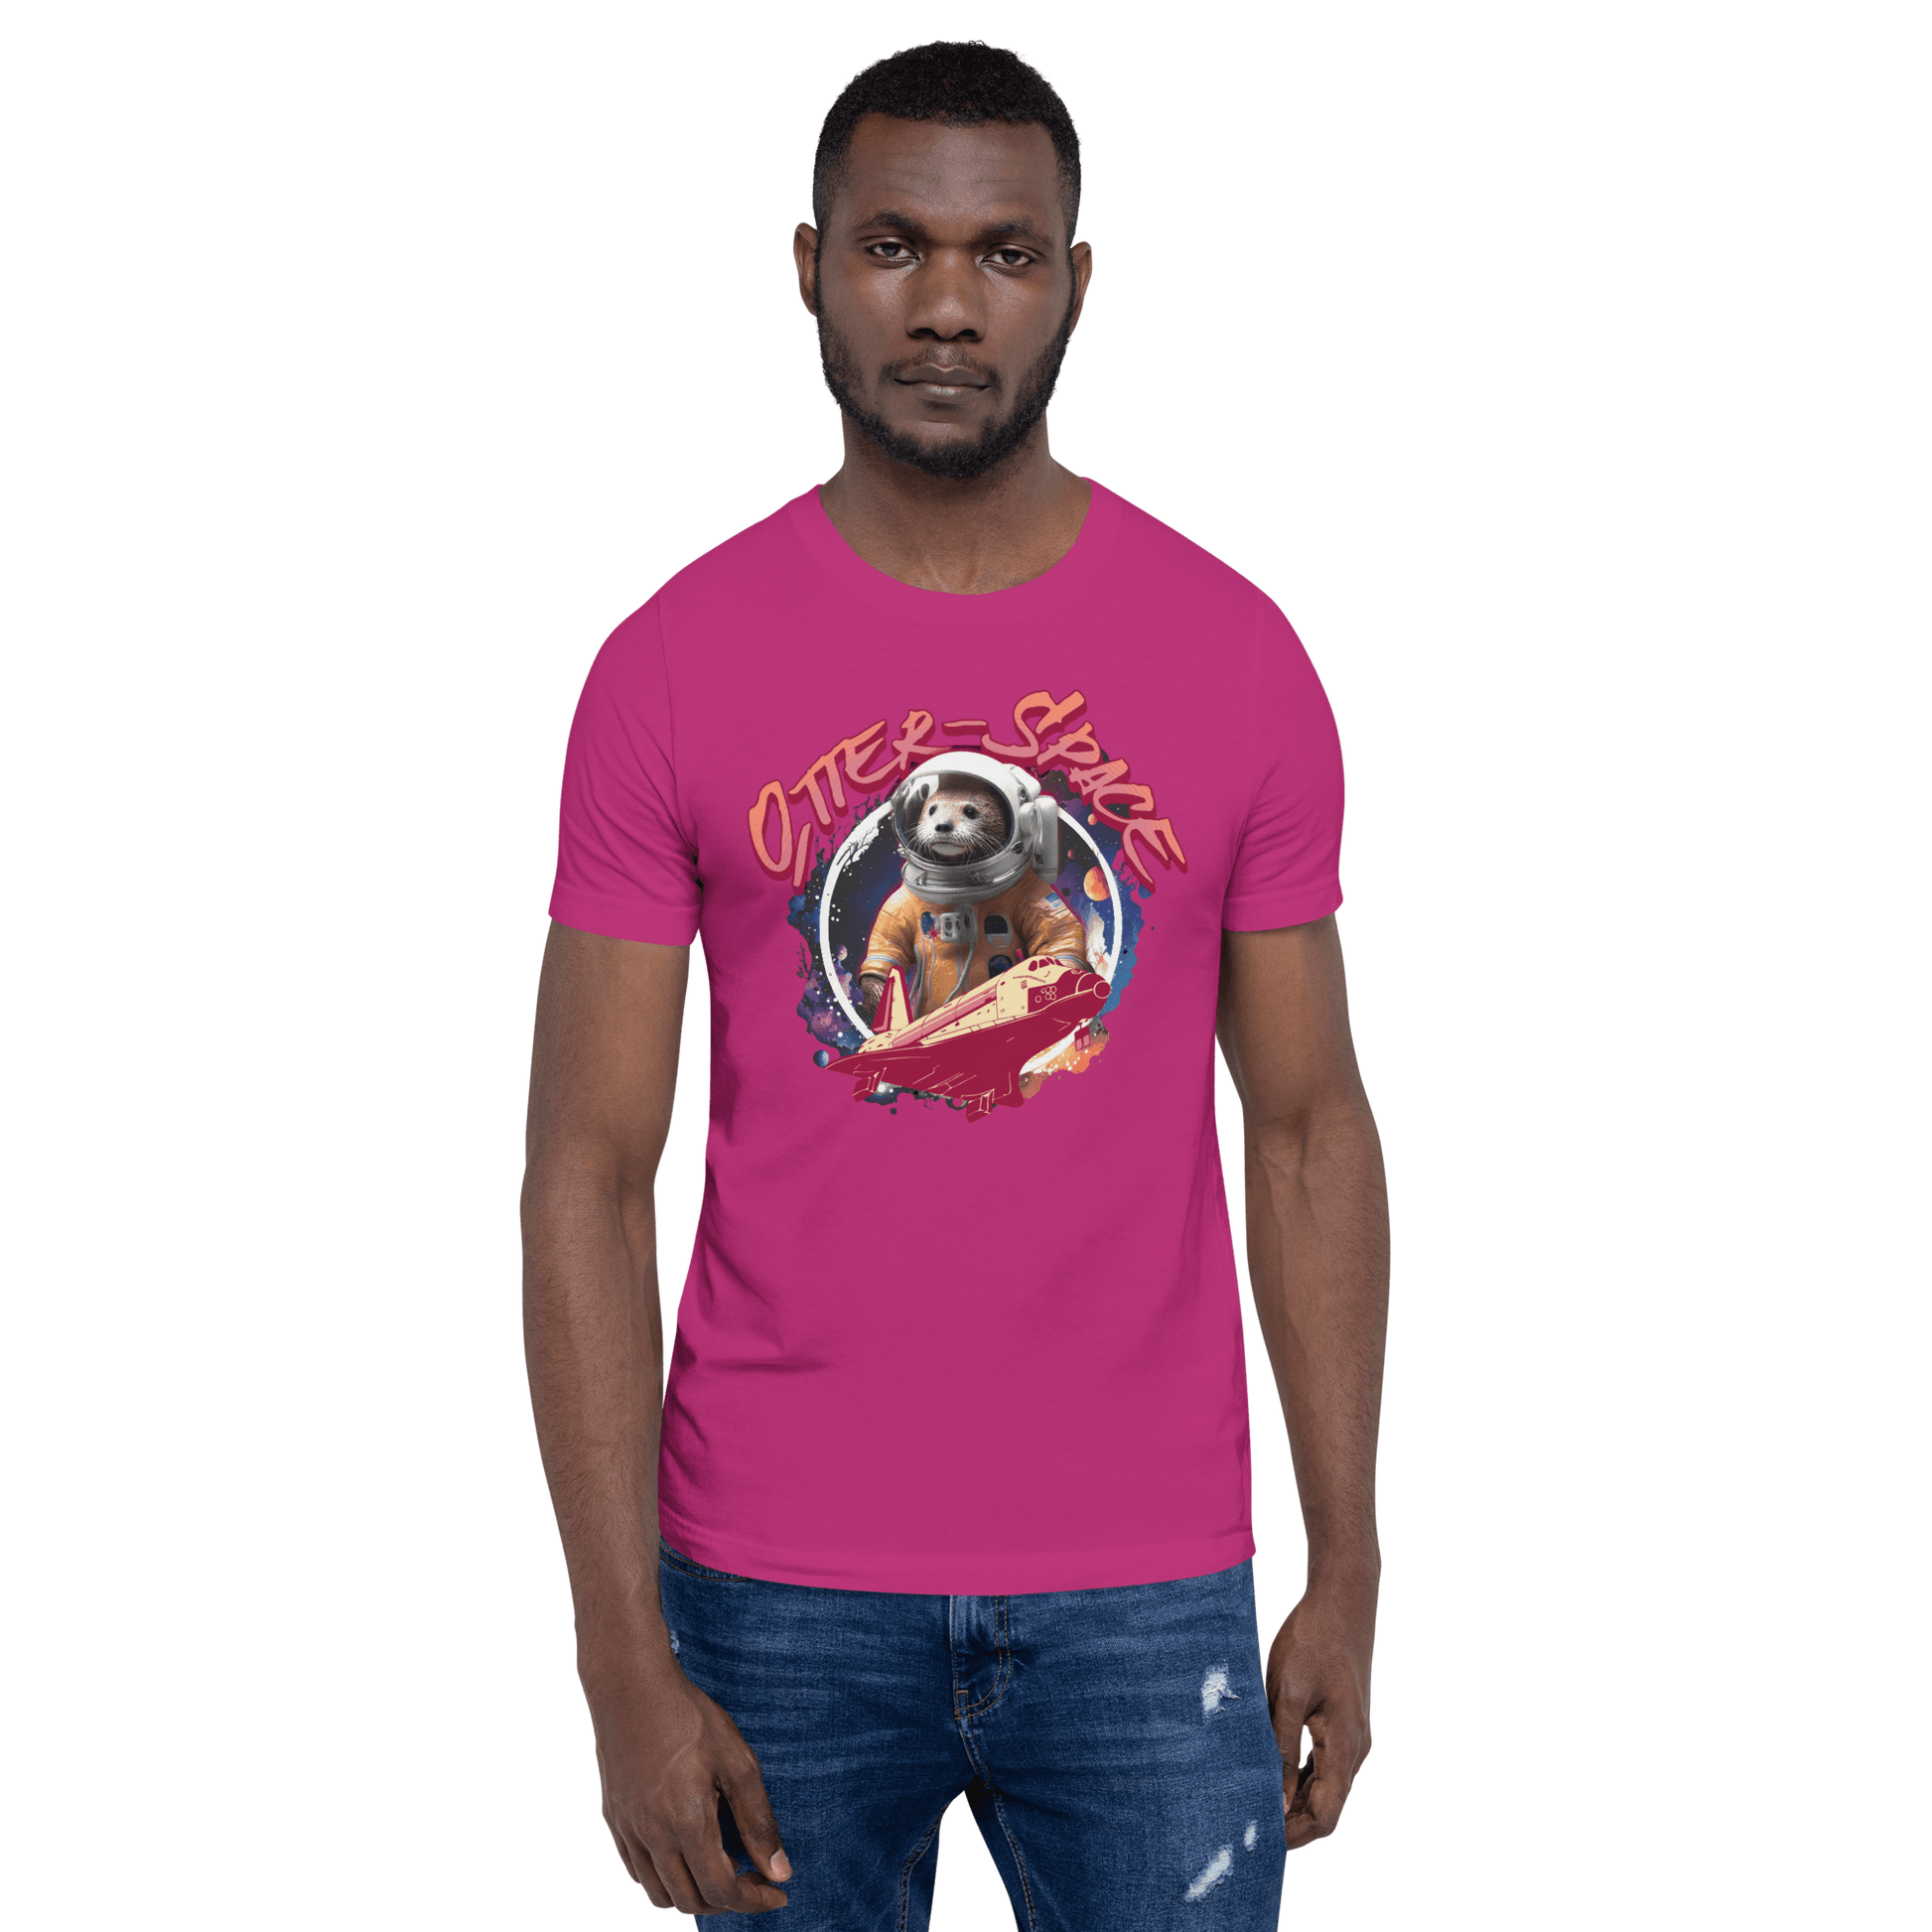 Otter-Space Crew Neck T-Shirt - Pet Pride Tees